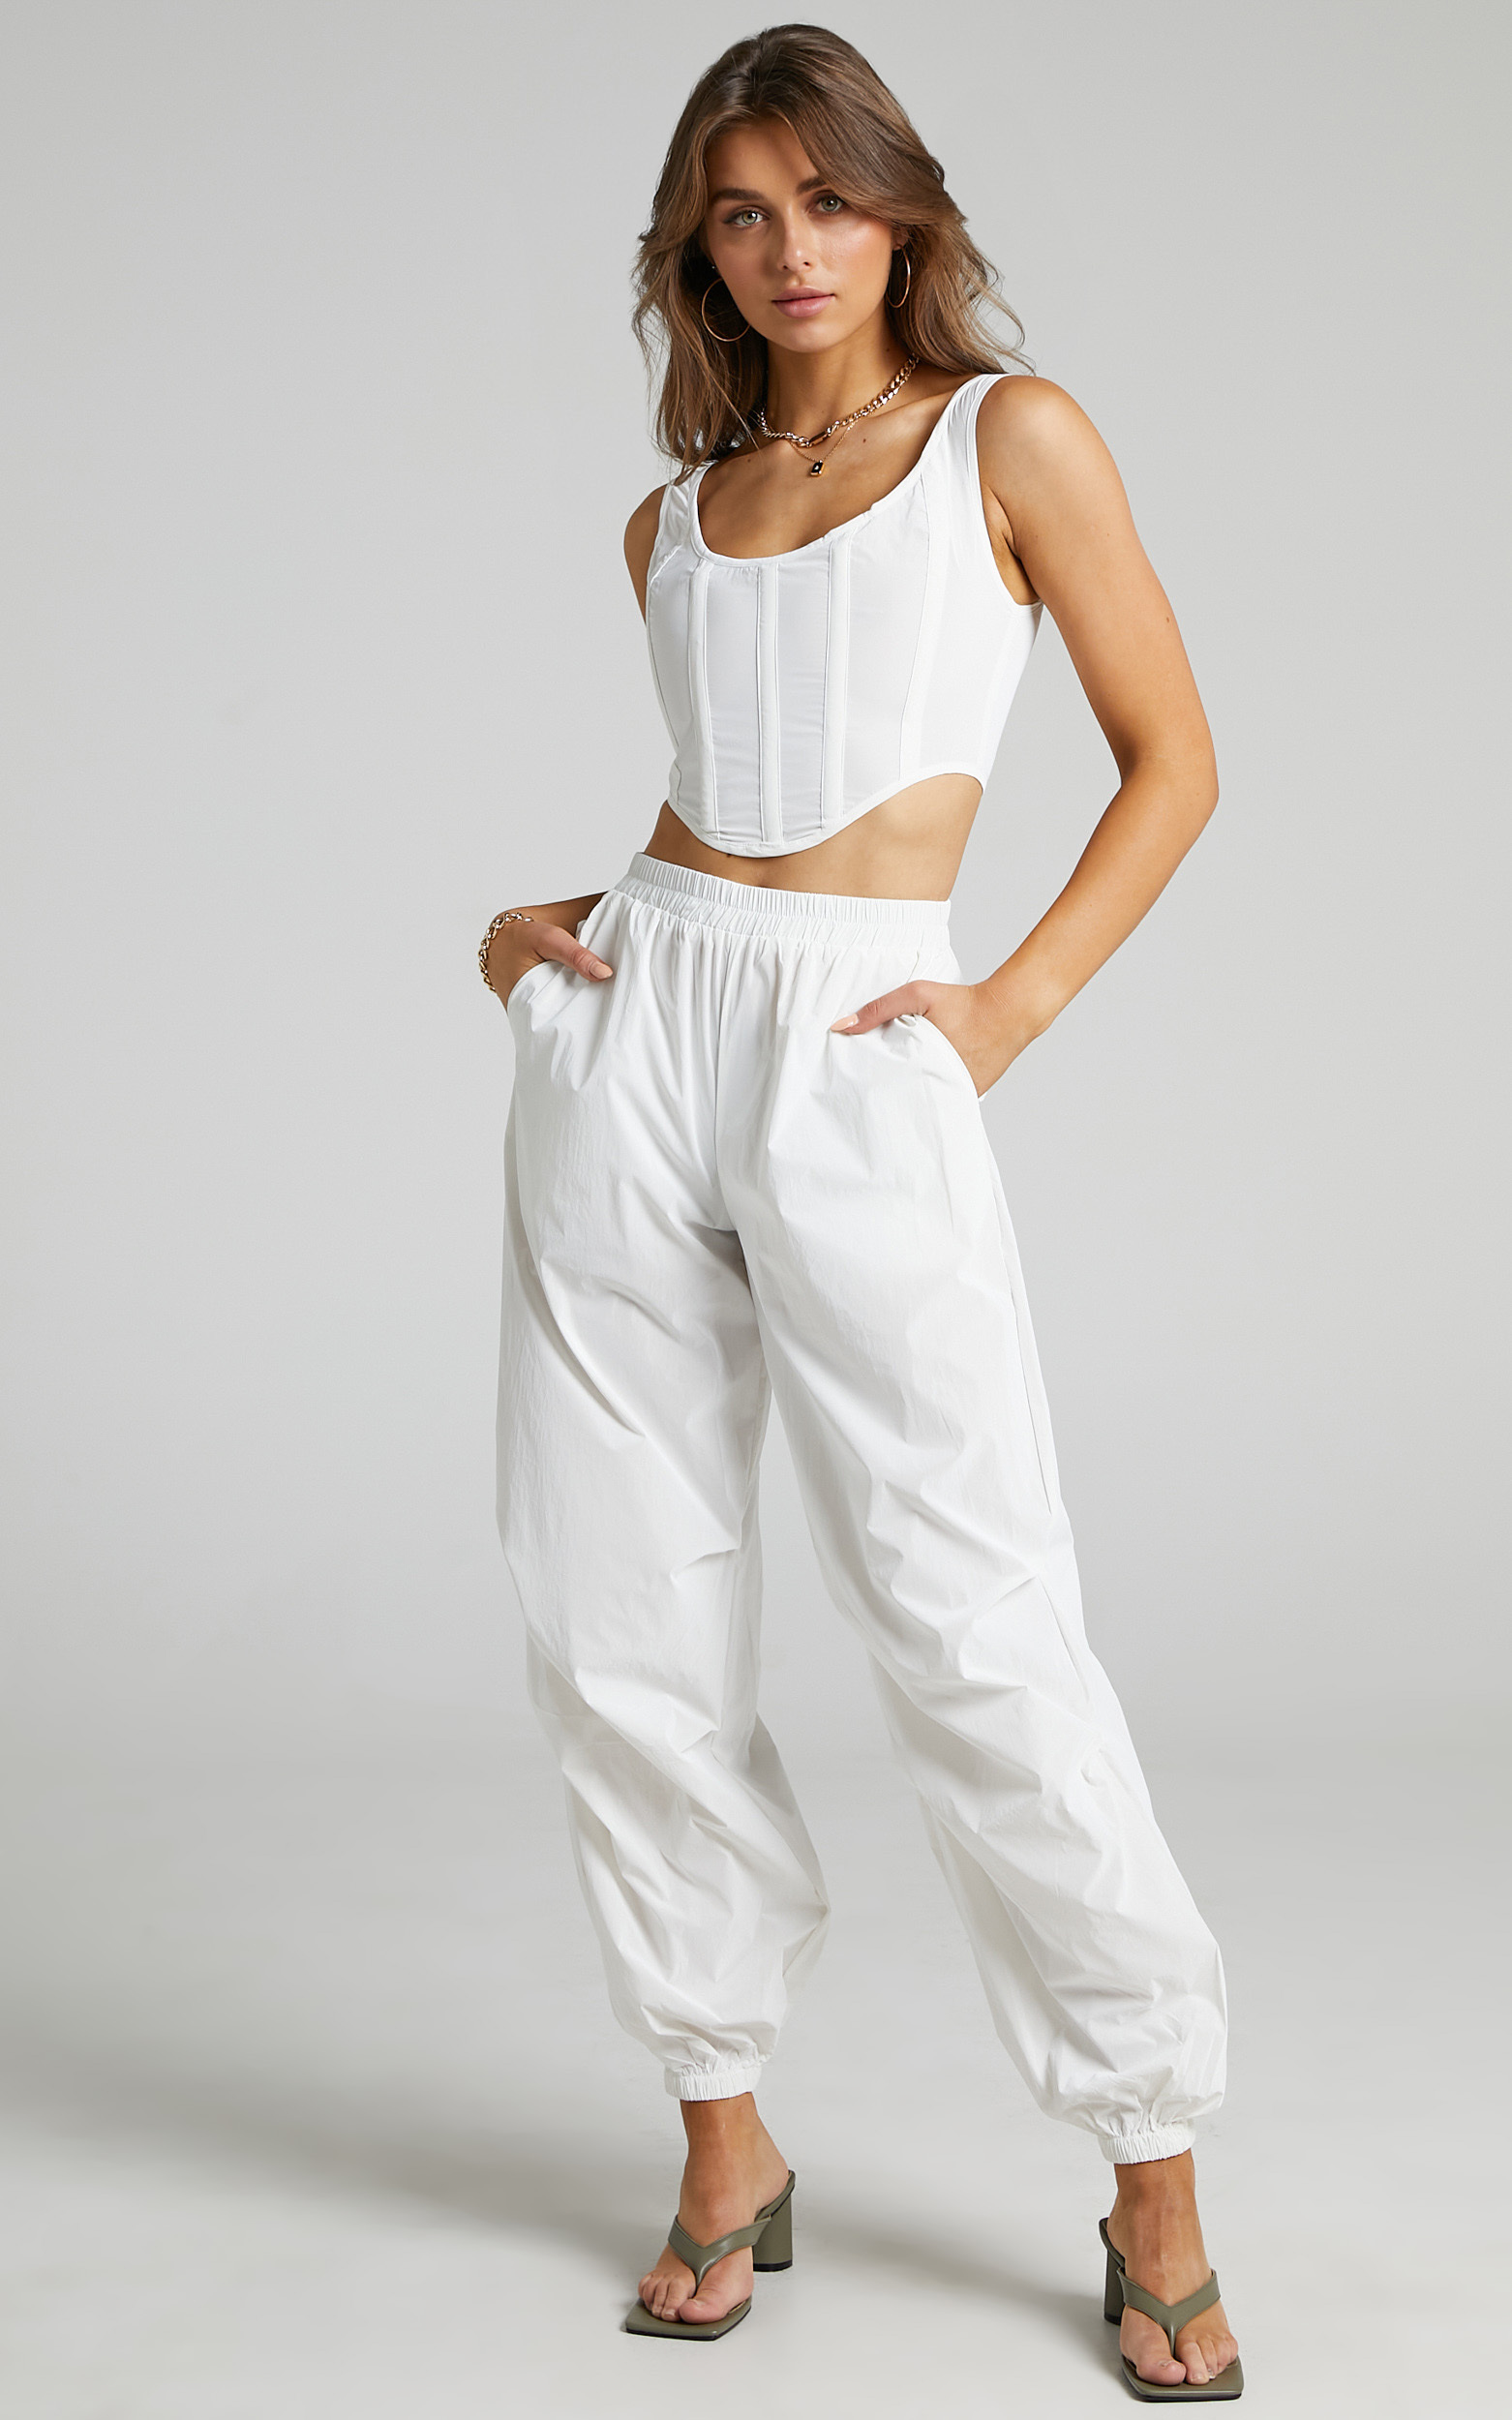 BY DYLN - Franco Pants in White - L, WHT2, hi-res image number null